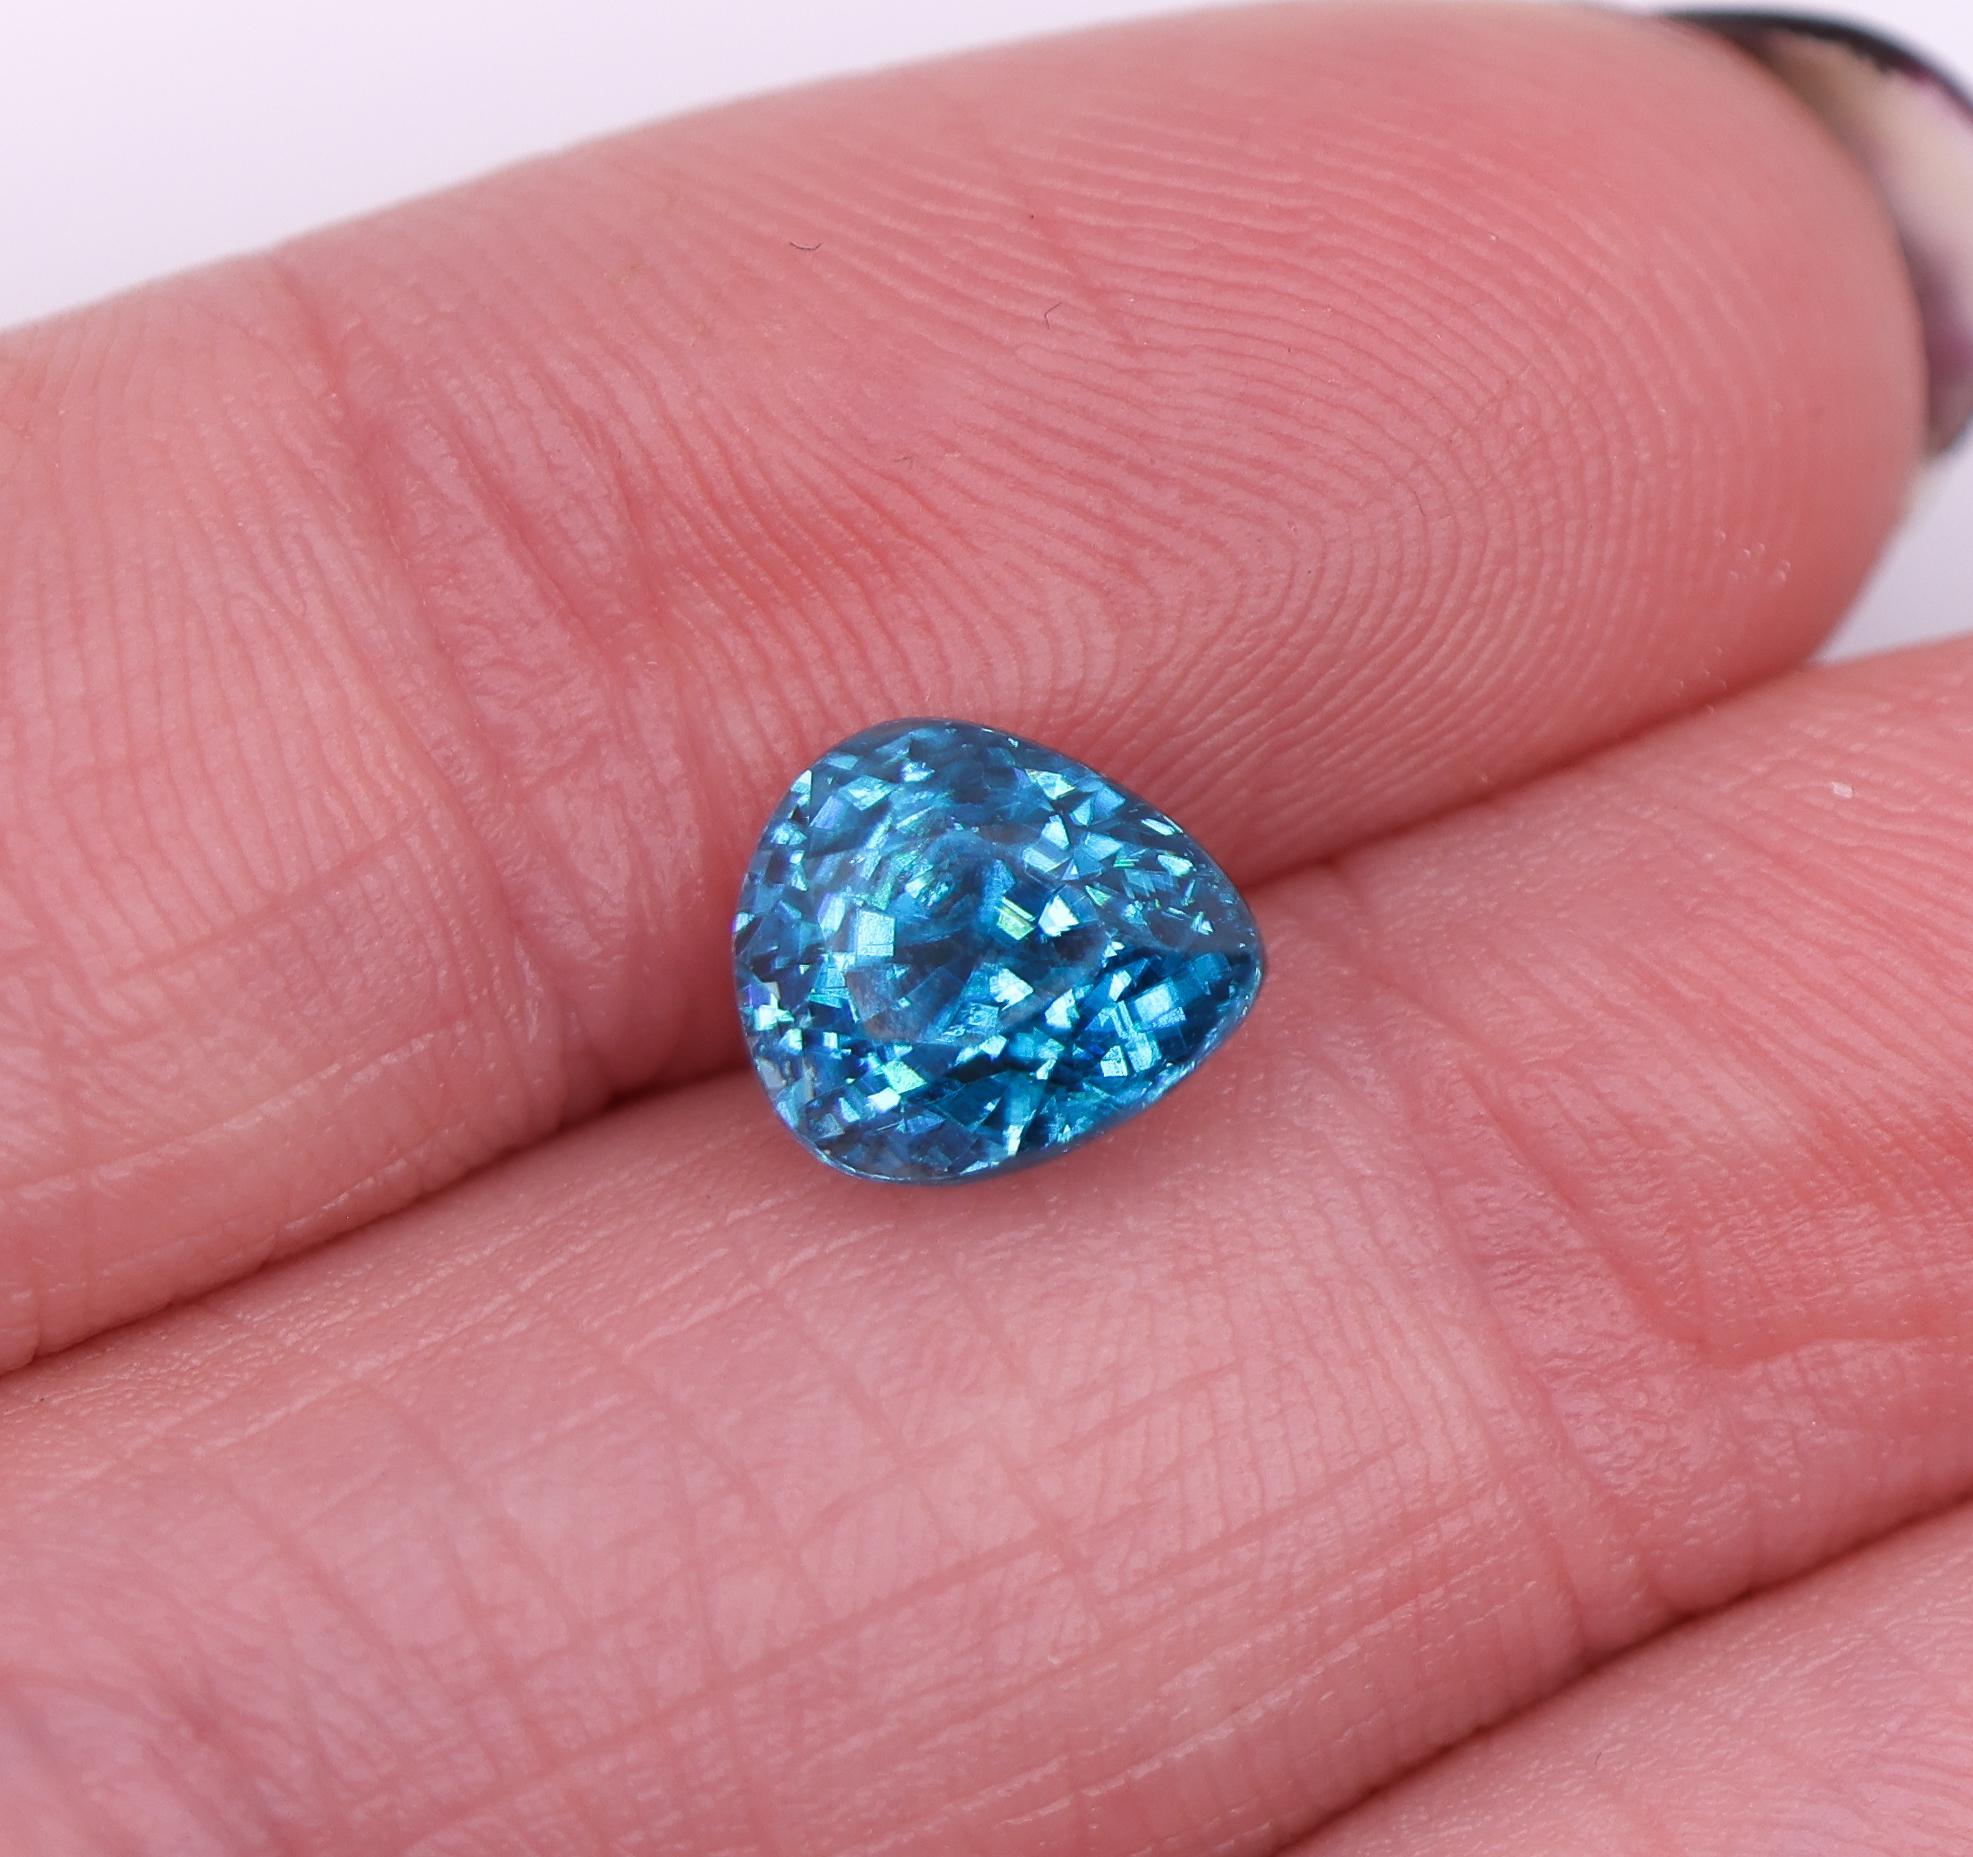 A gorgeous pear shape blue zircon looking for it's next home. If you feel a sparkle of excitement seeing this gem and want to design a one of a kind piece of jewelry, let us know! 

Cambodian Zircon is the perfect eco-friendly alternative to